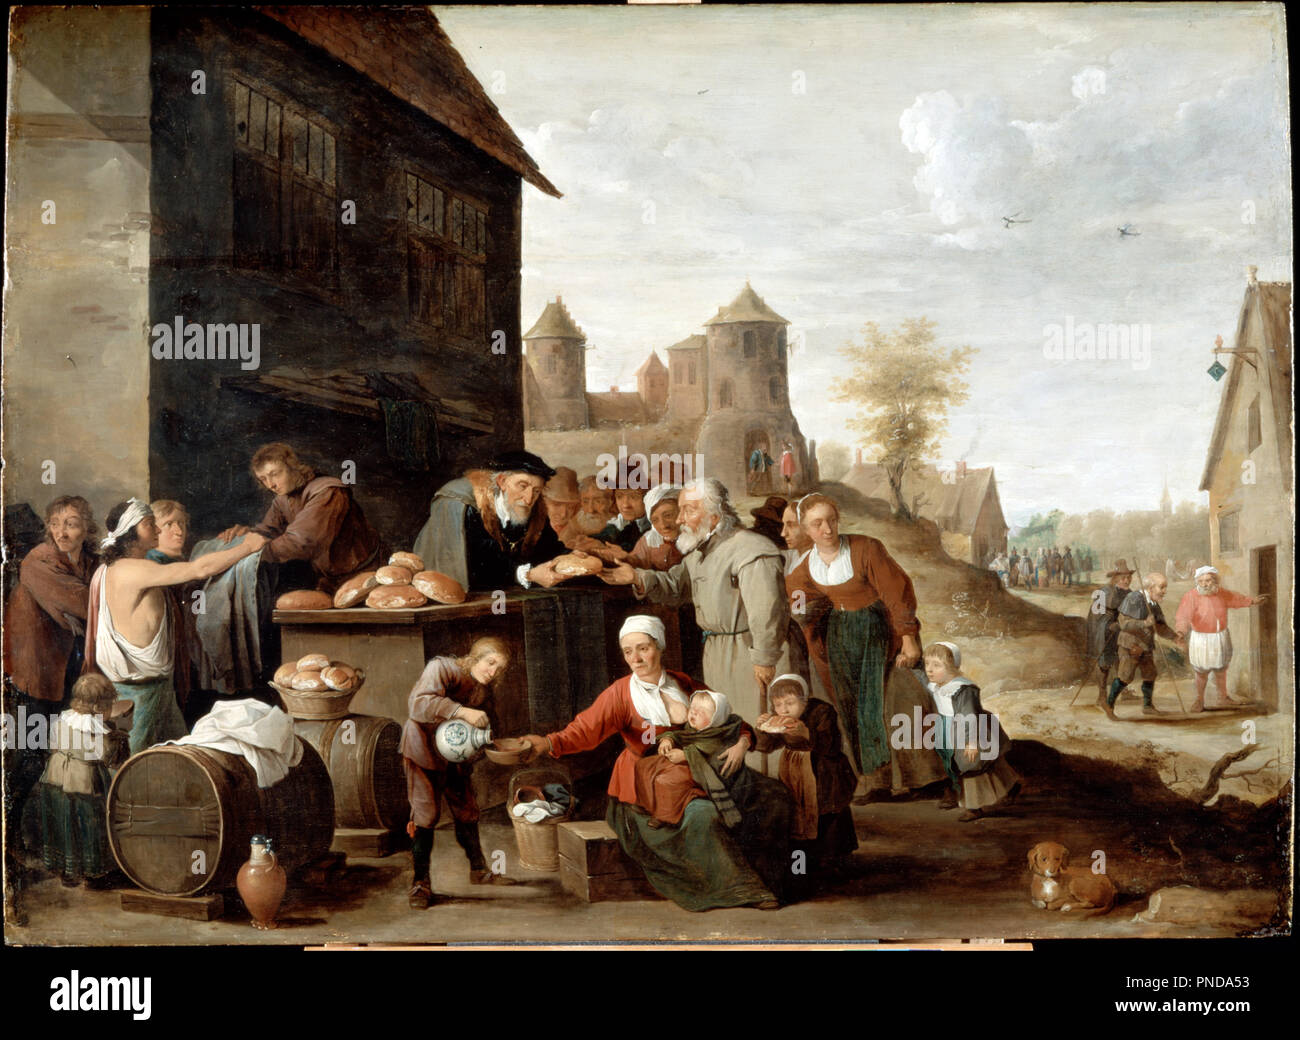 The Seven Corporal Works of Mercy. Date/Period: 17th century. Painting. Oil on panel Oil. Height: 648 mm (25.51 in); Width: 885 mm (34.84 in). Author: Studio of Teniers, David the younger. DAVID TENIERS, THE YOUNGER. Stock Photo